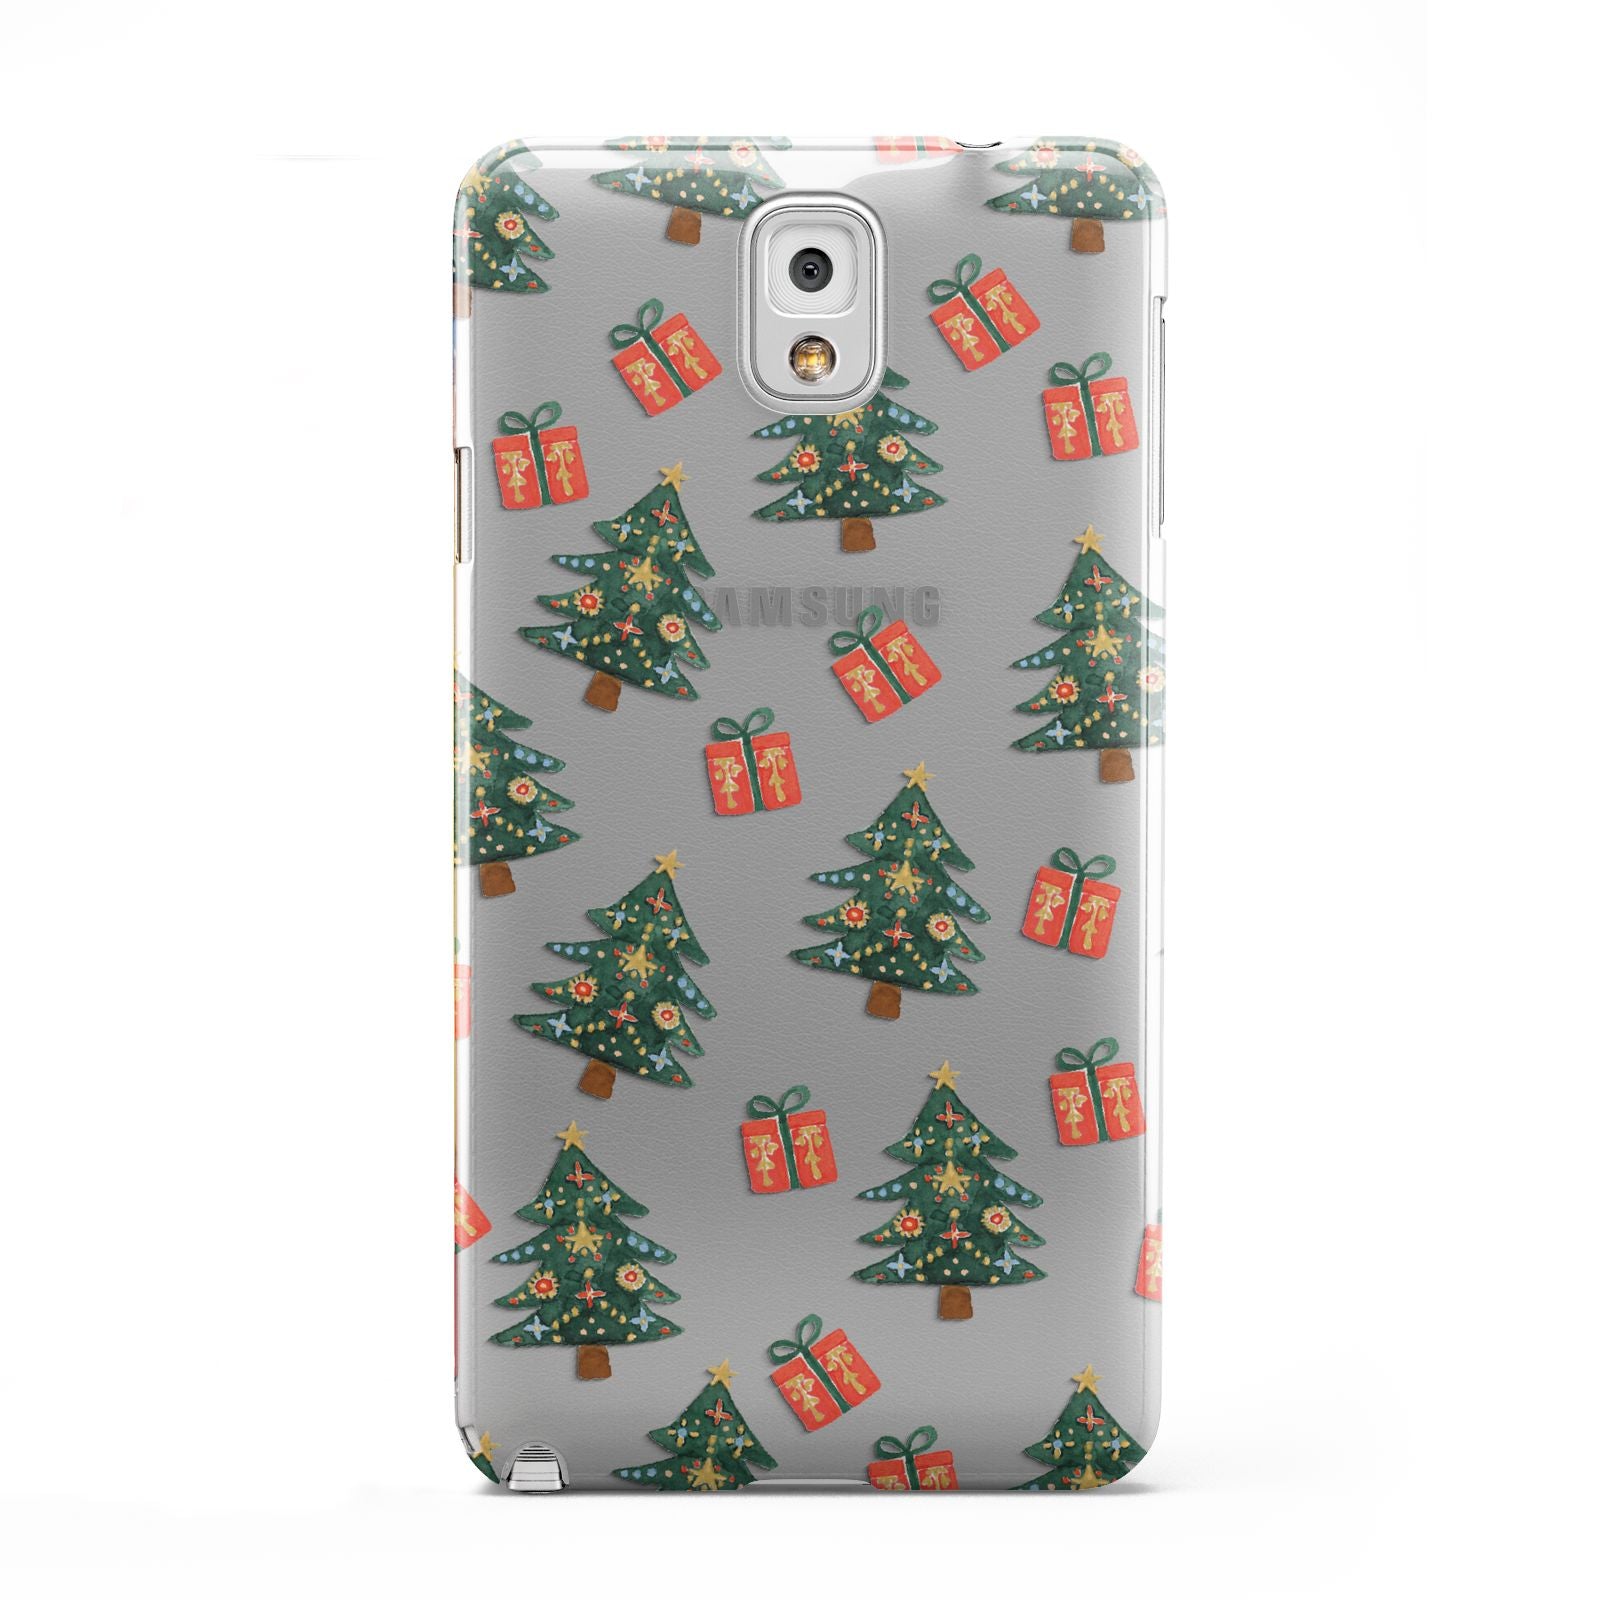 Christmas tree and presents Samsung Galaxy Note 3 Case